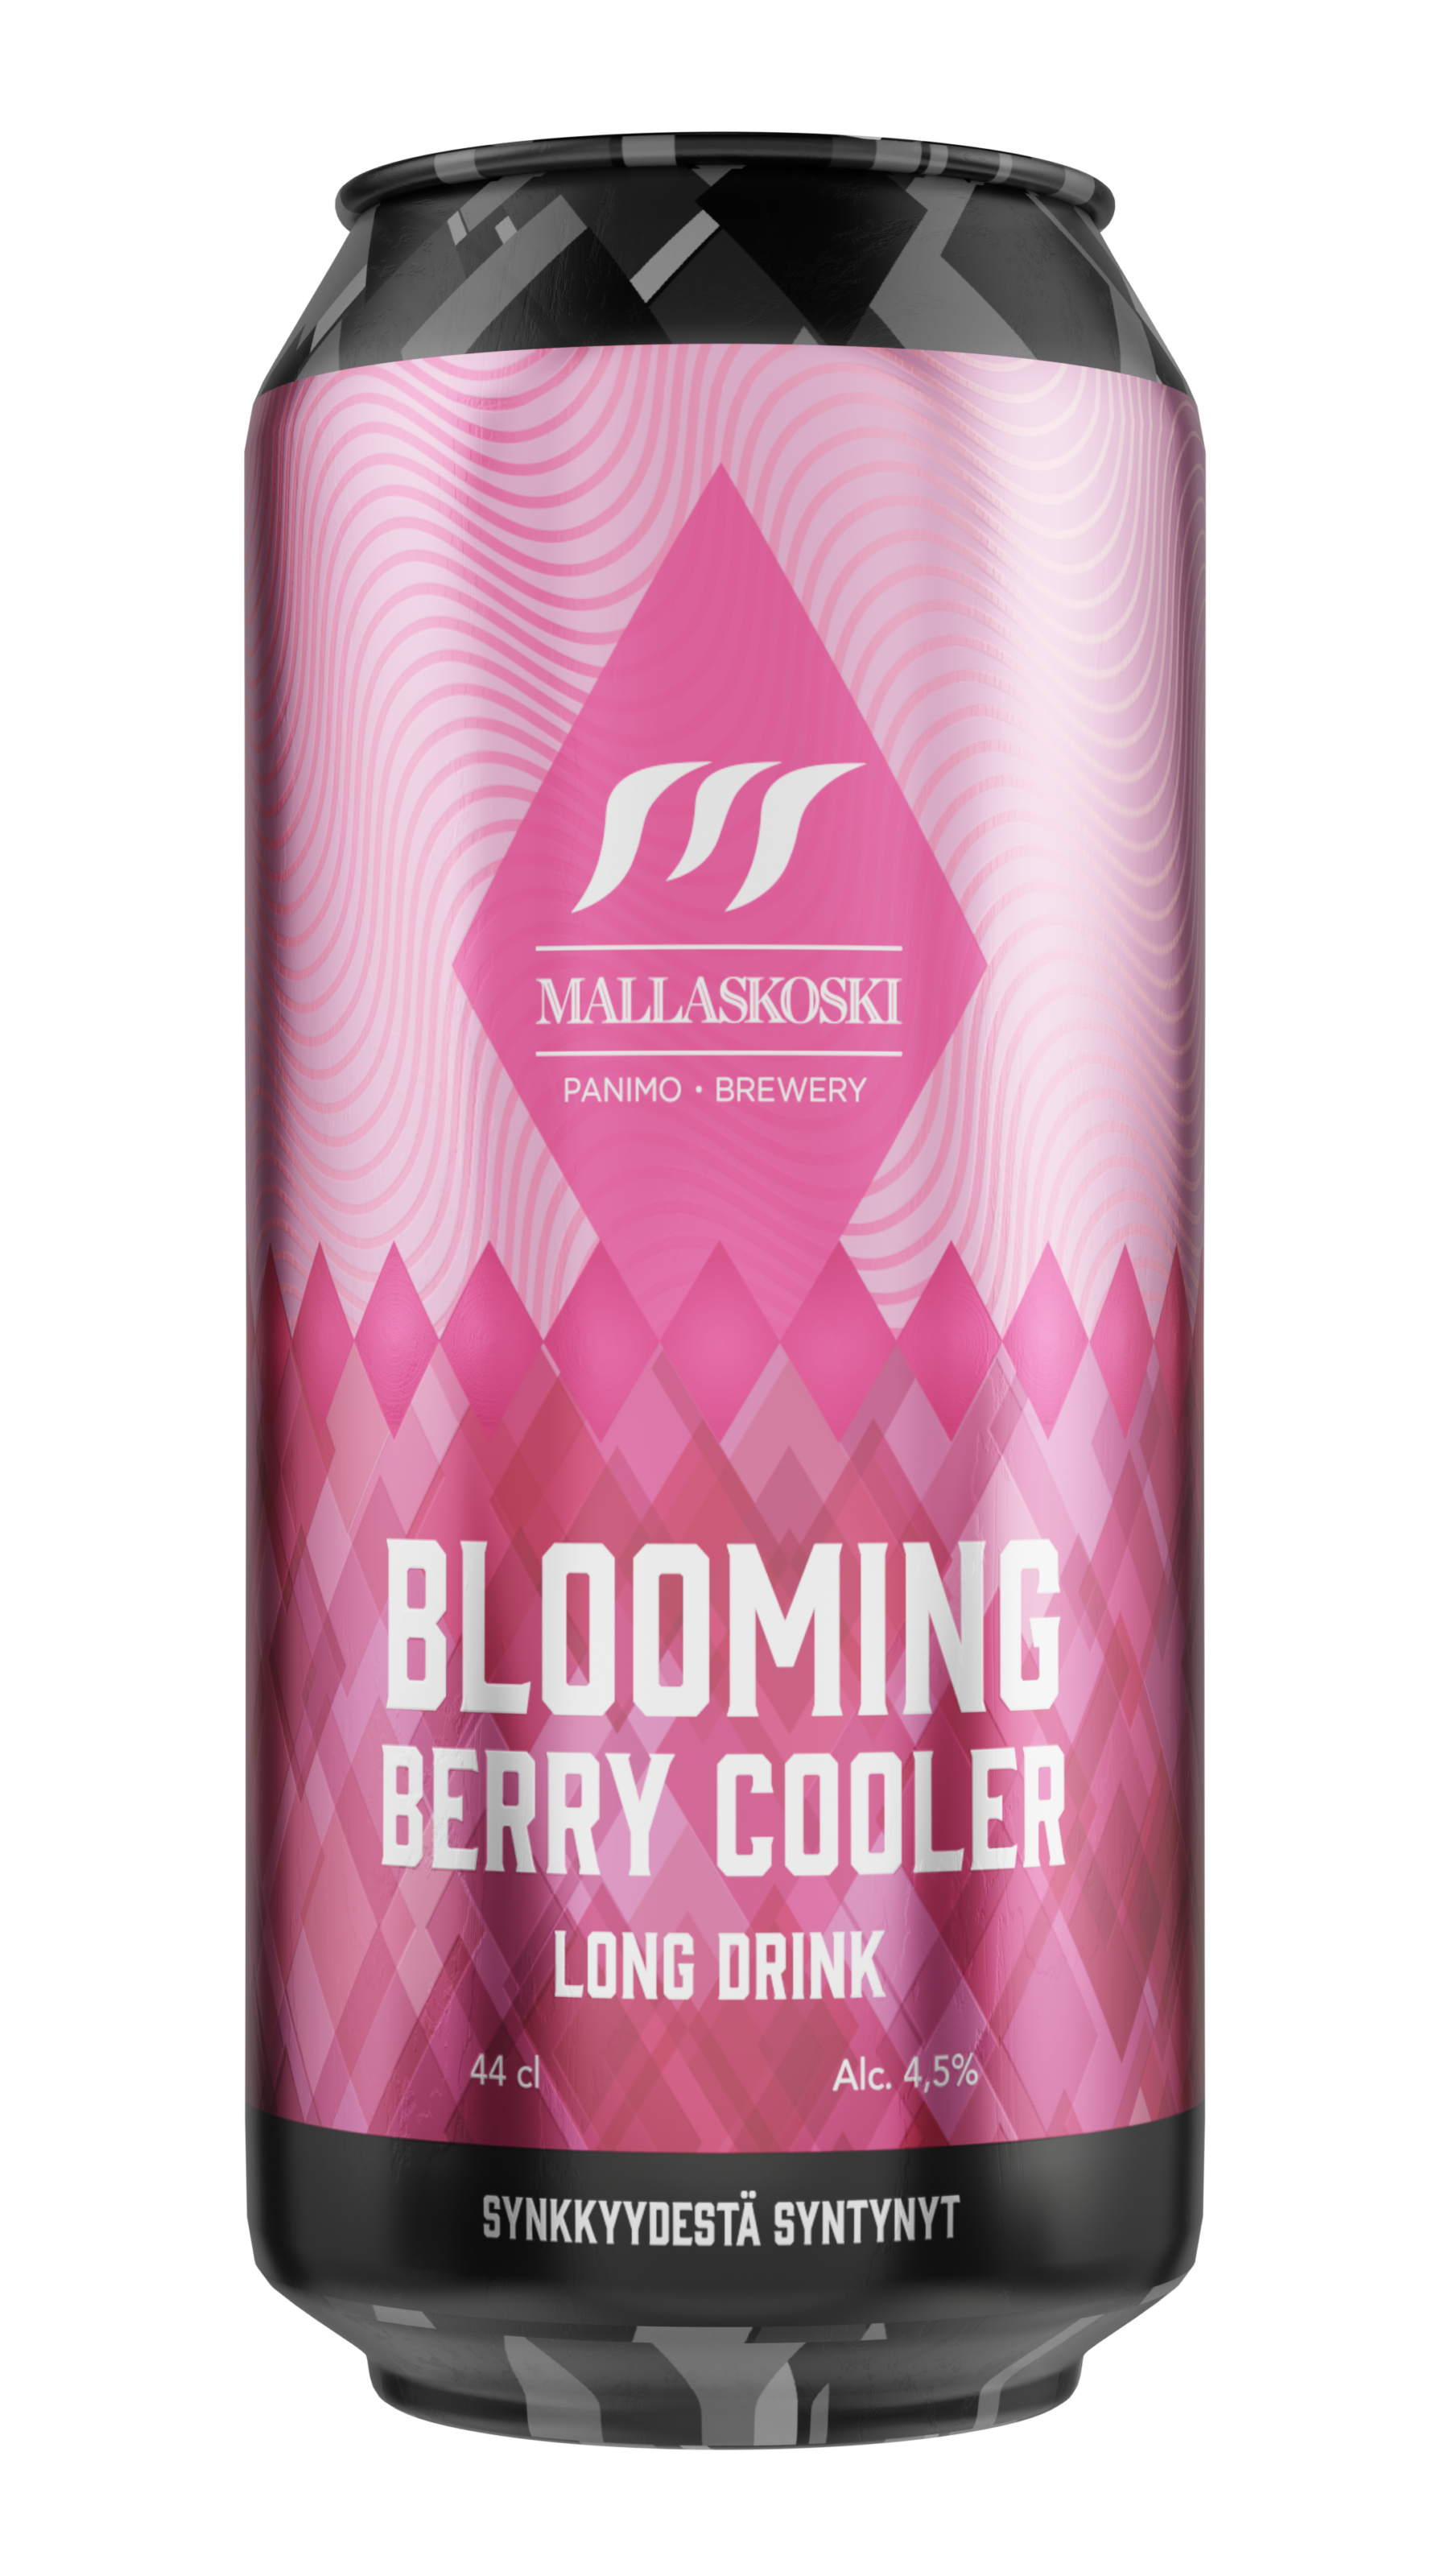 Blooming Berry Cooler